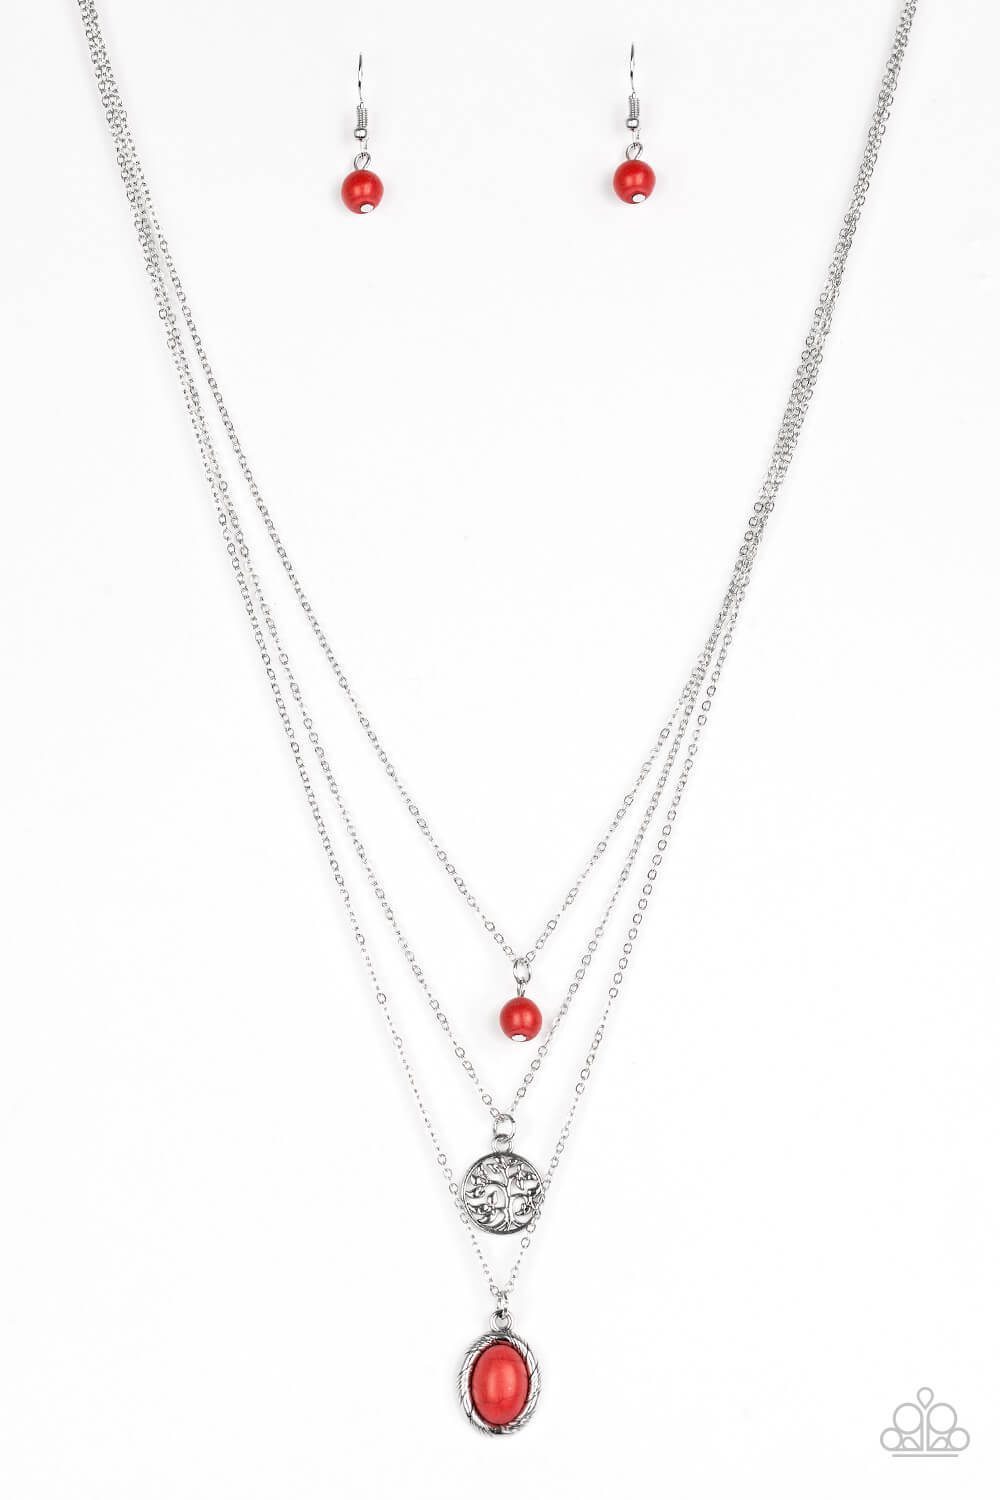 Southern Roots - Red Necklace Set - Princess Glam Shop